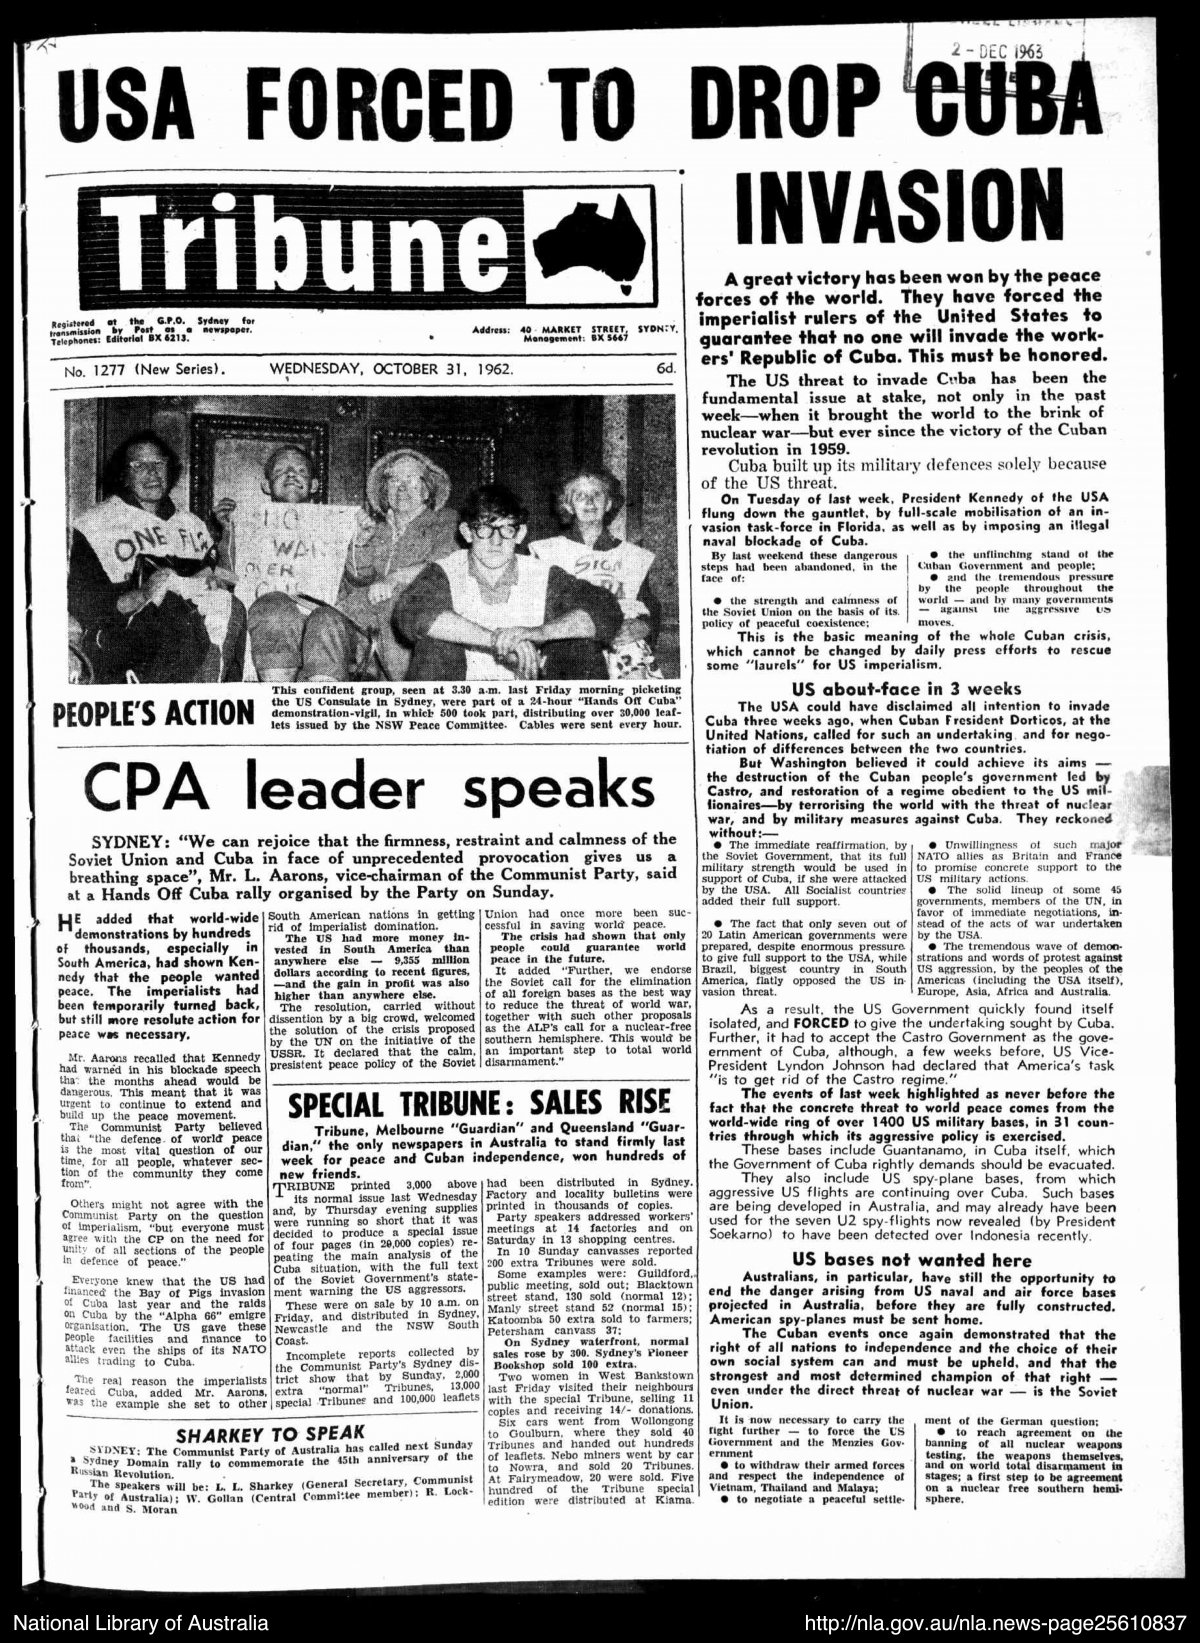 The front page of the Tribune newspaper. The headline reads "USA FORCED TO DROP CUBA INVASION". There is a black and white photograph of 5 people holding protest signs.